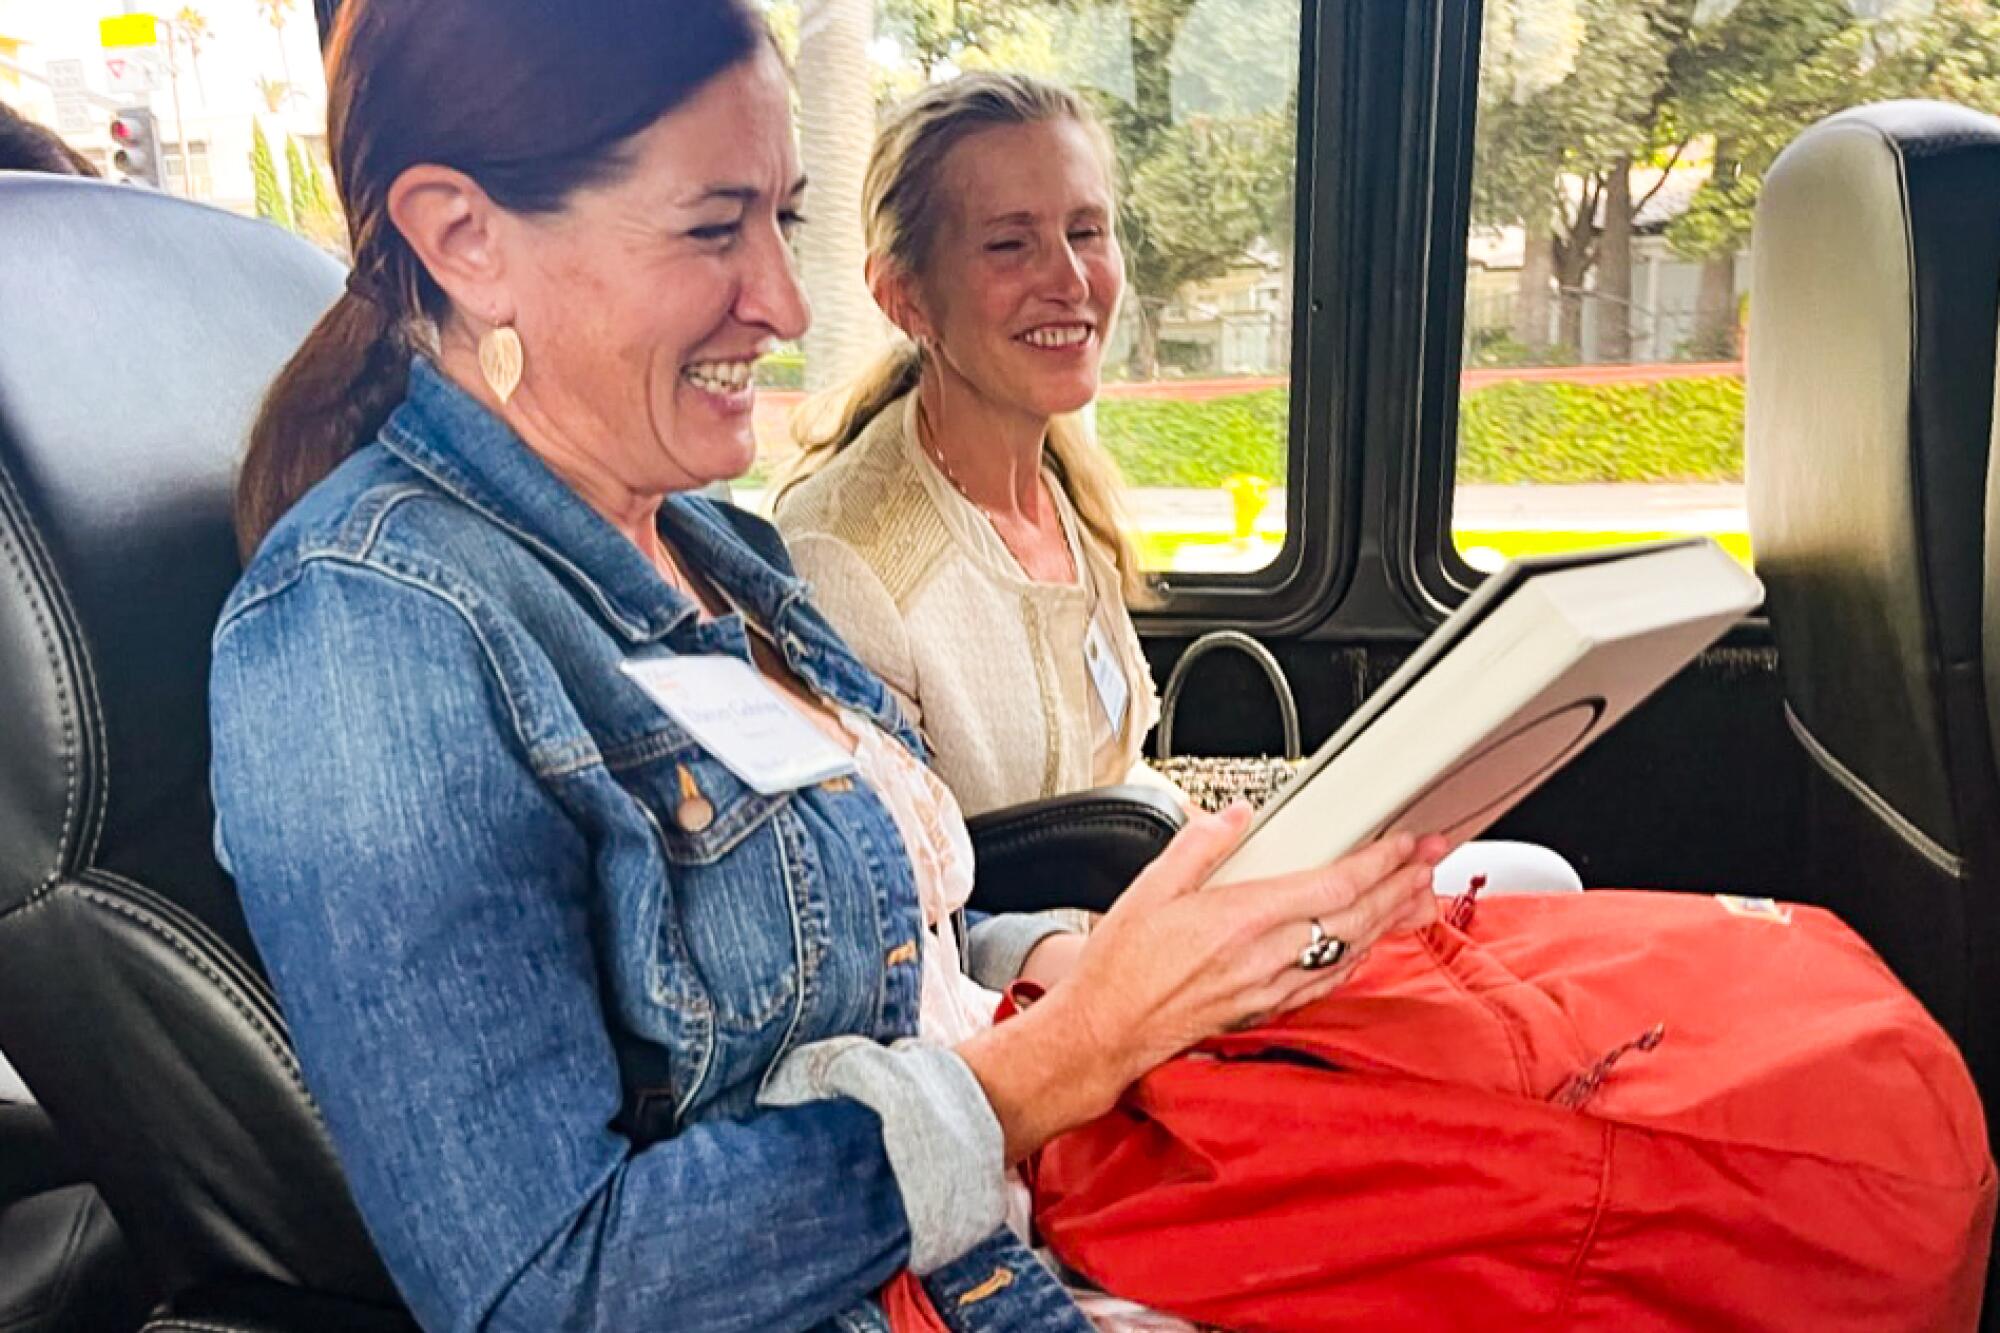 Two smiling women sit side-by-side on a bus, one holding a book